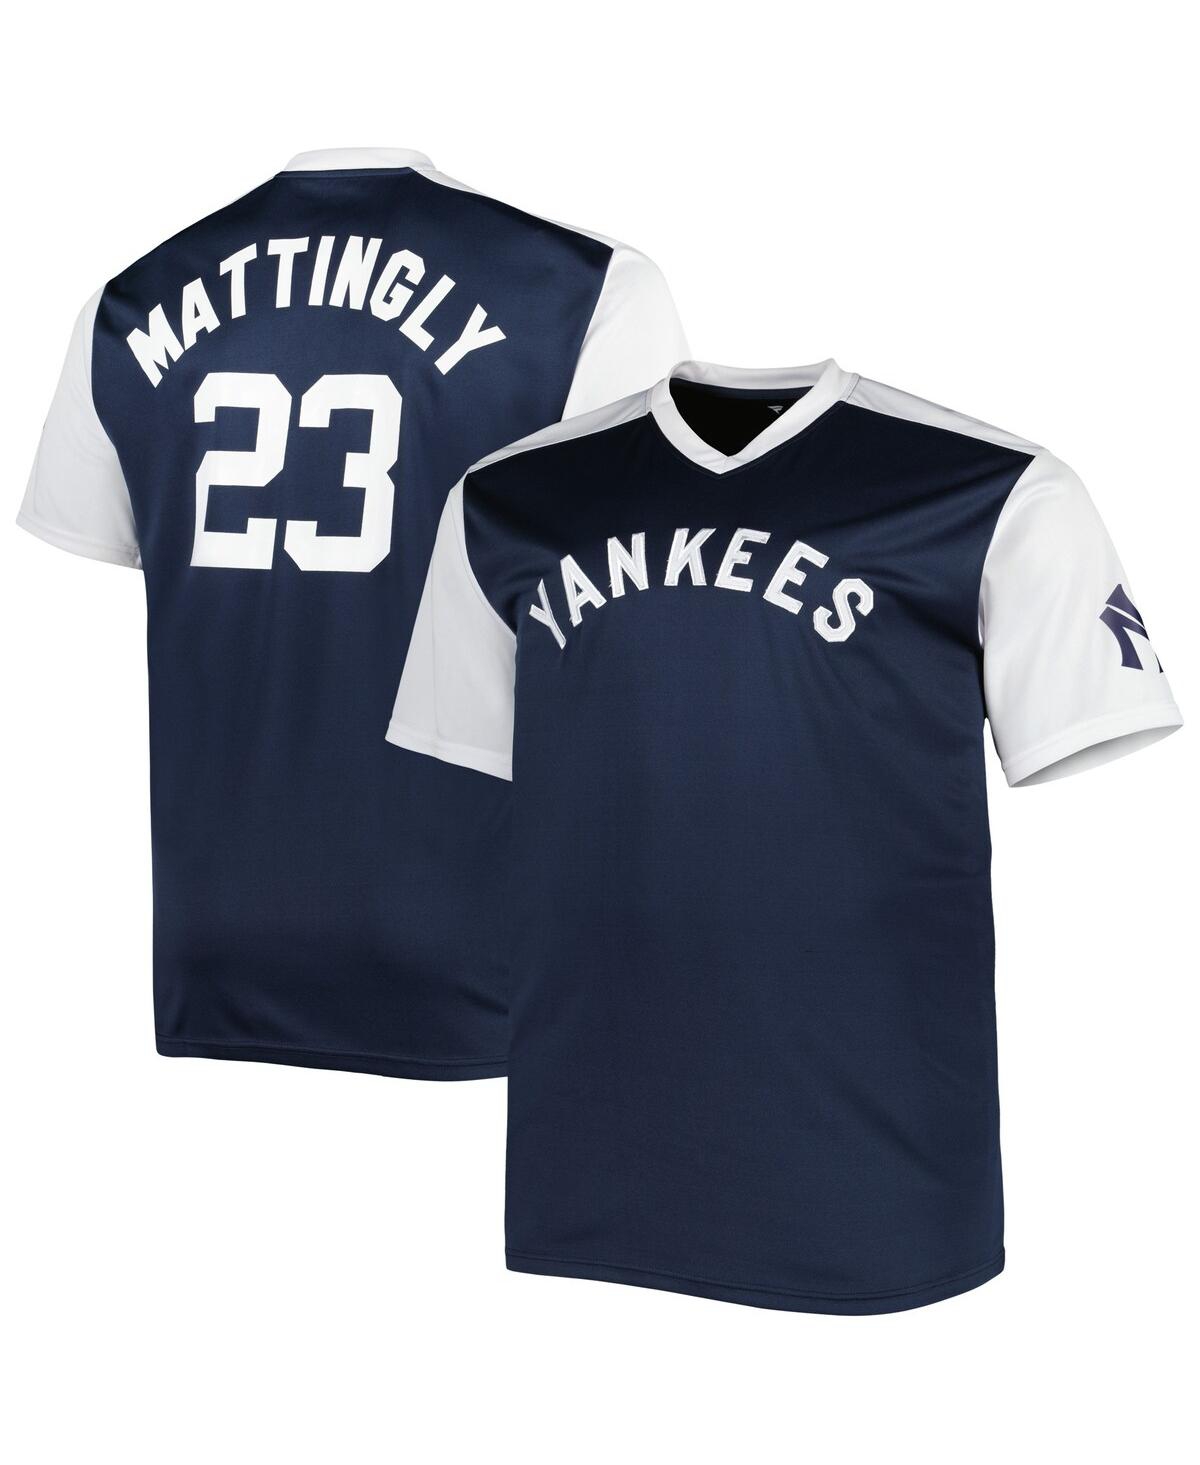 Men's Don Mattingly Navy, White New York Yankees Cooperstown Collection Replica Player Jersey - Navy, White